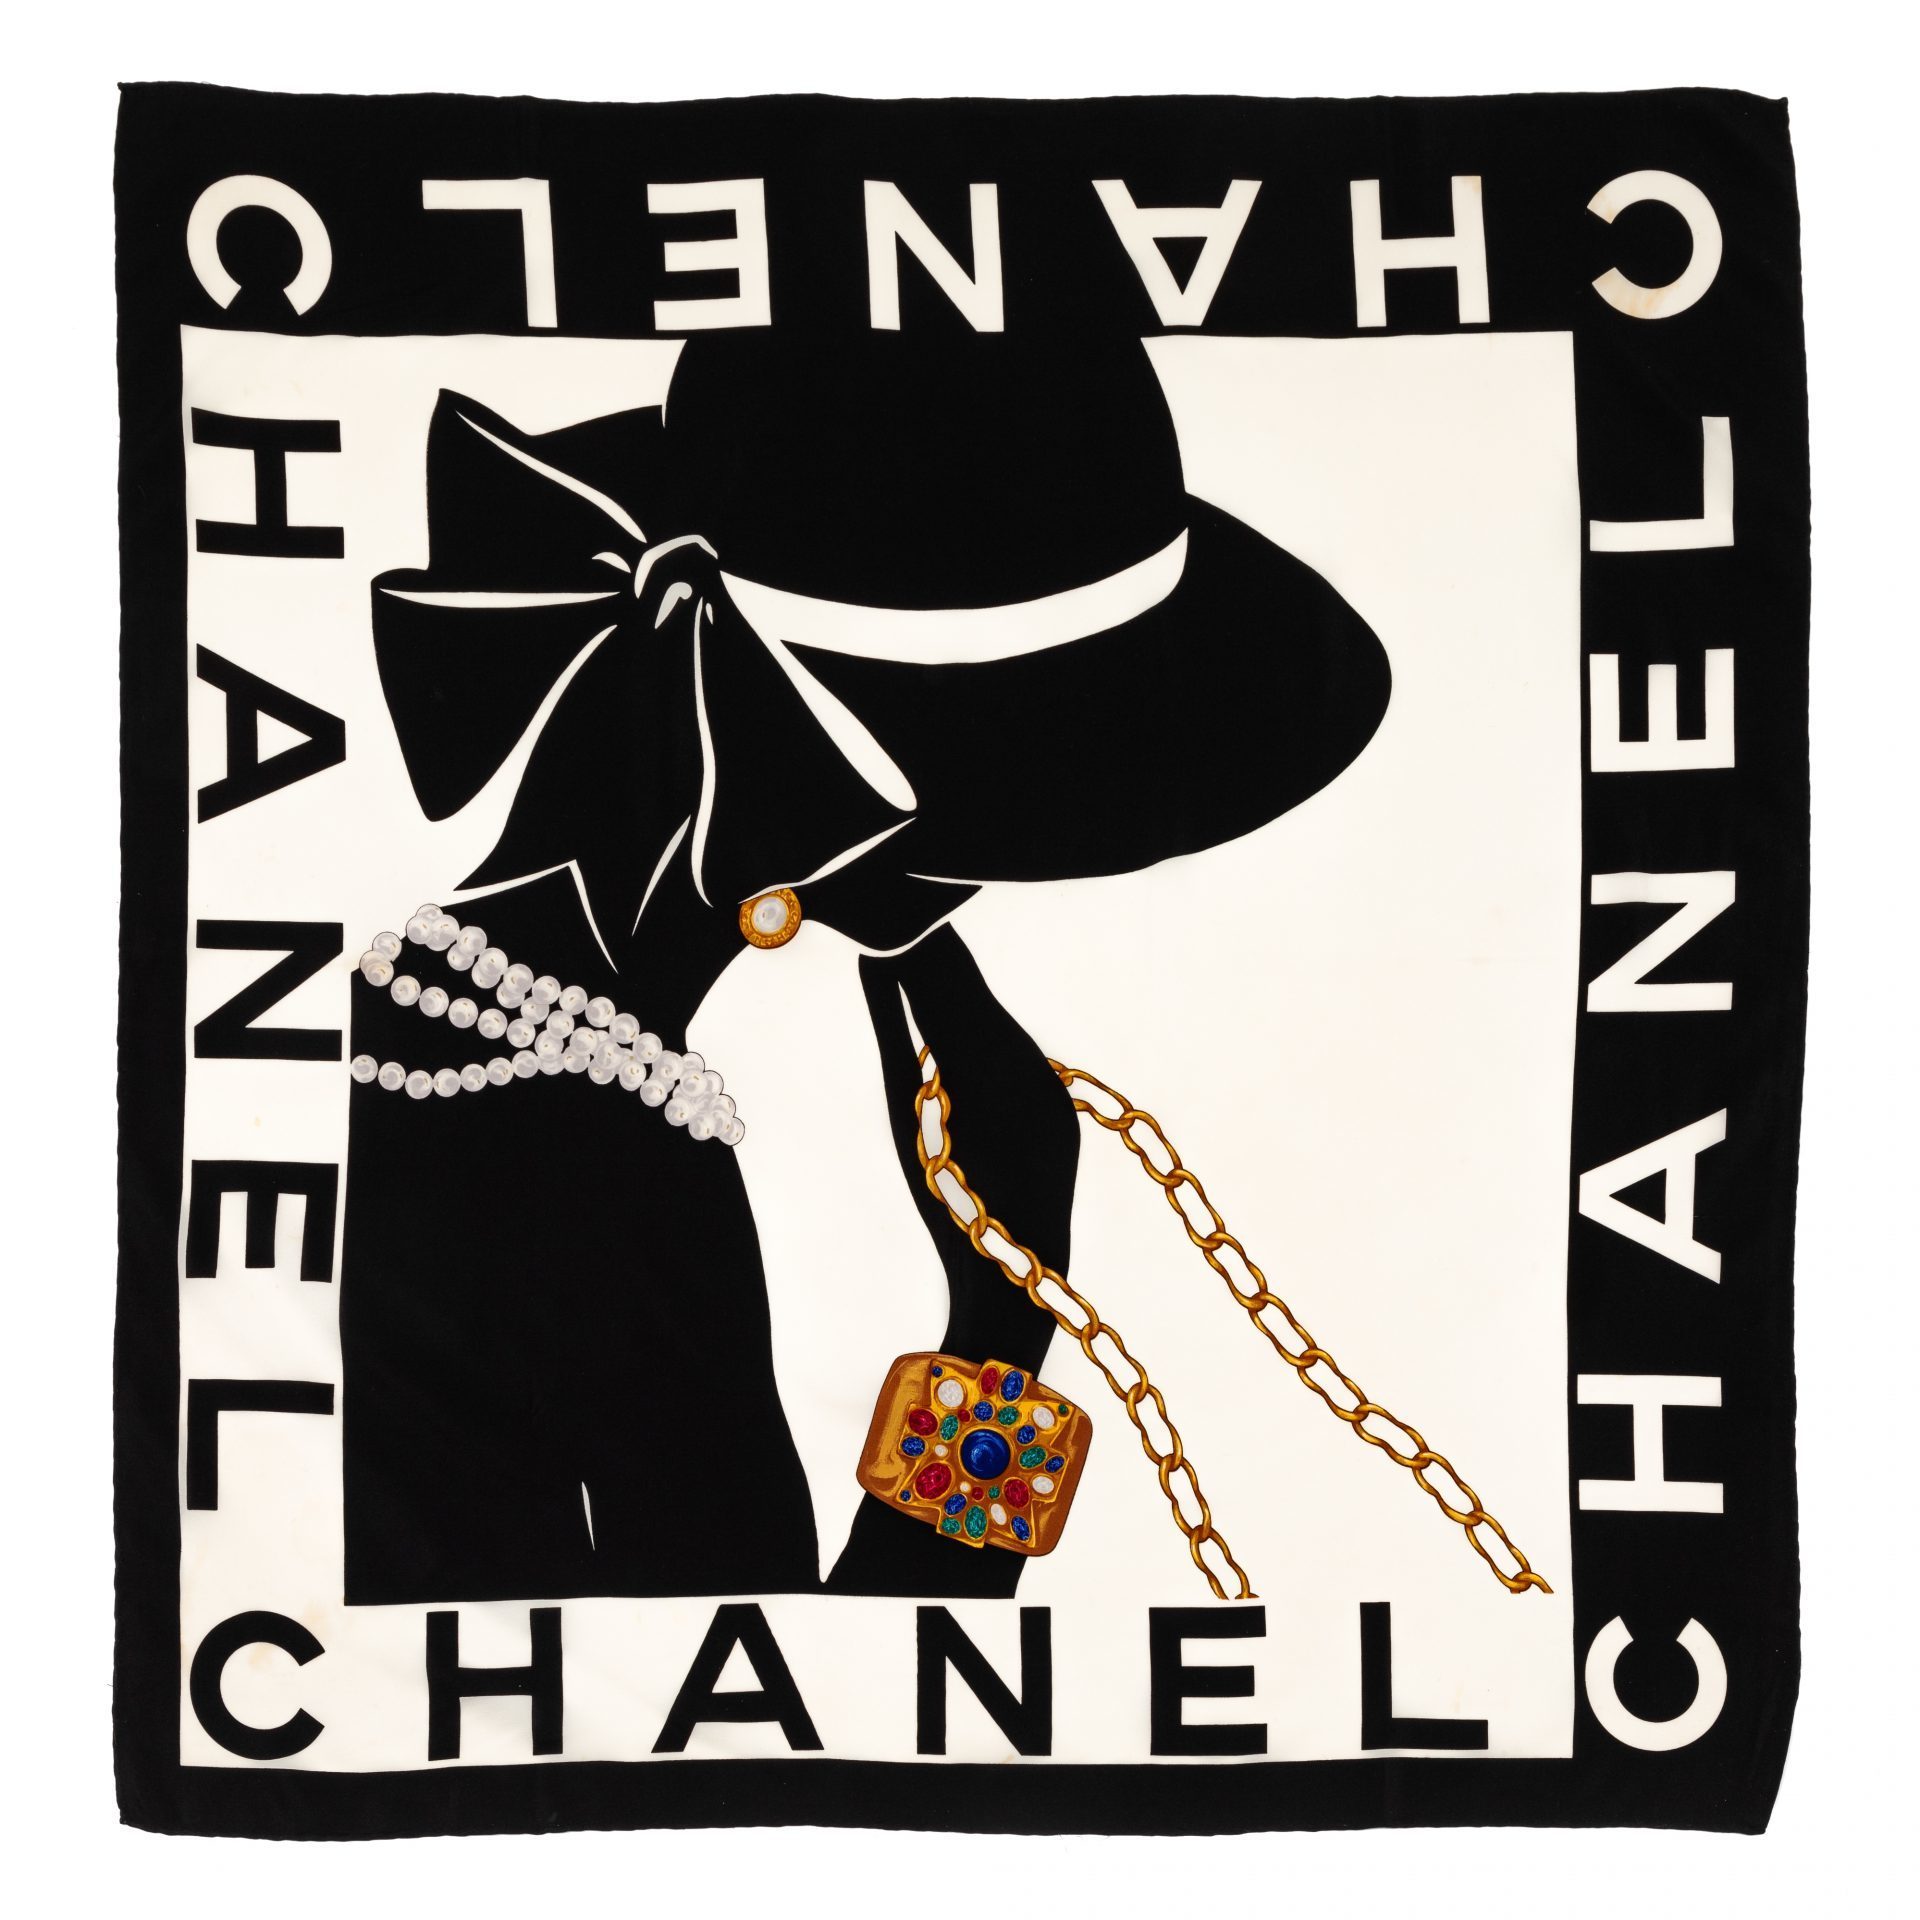 The Original Influencer: How Coco Chanel Forever Changed Women's Fashion